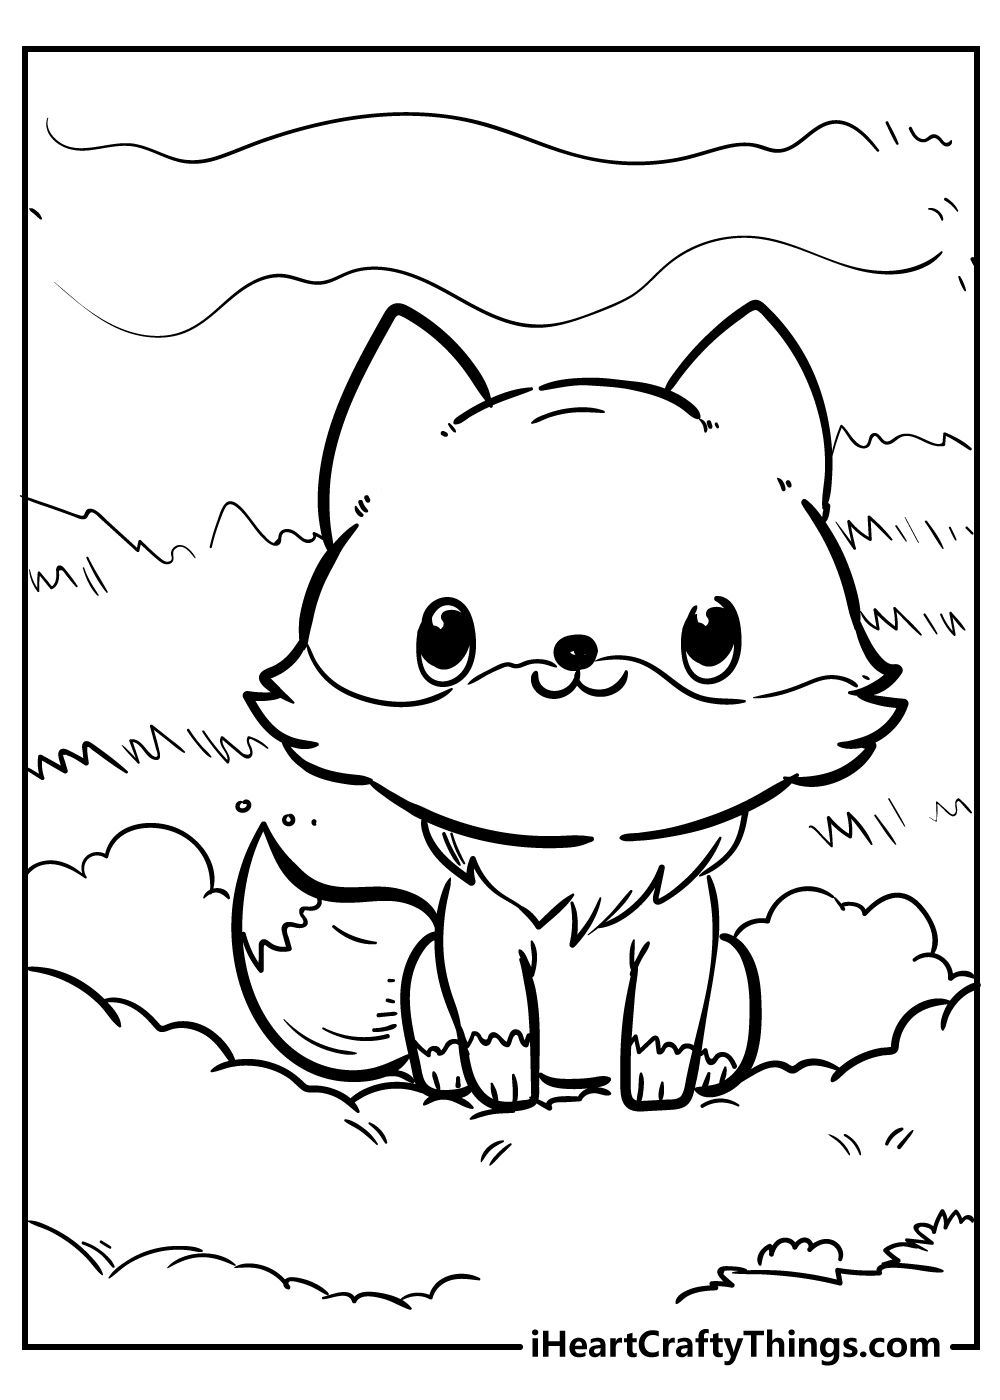 Cute Animals Coloring Pages | Cute coloring pages, Animal coloring pages,  Cartoon coloring pages